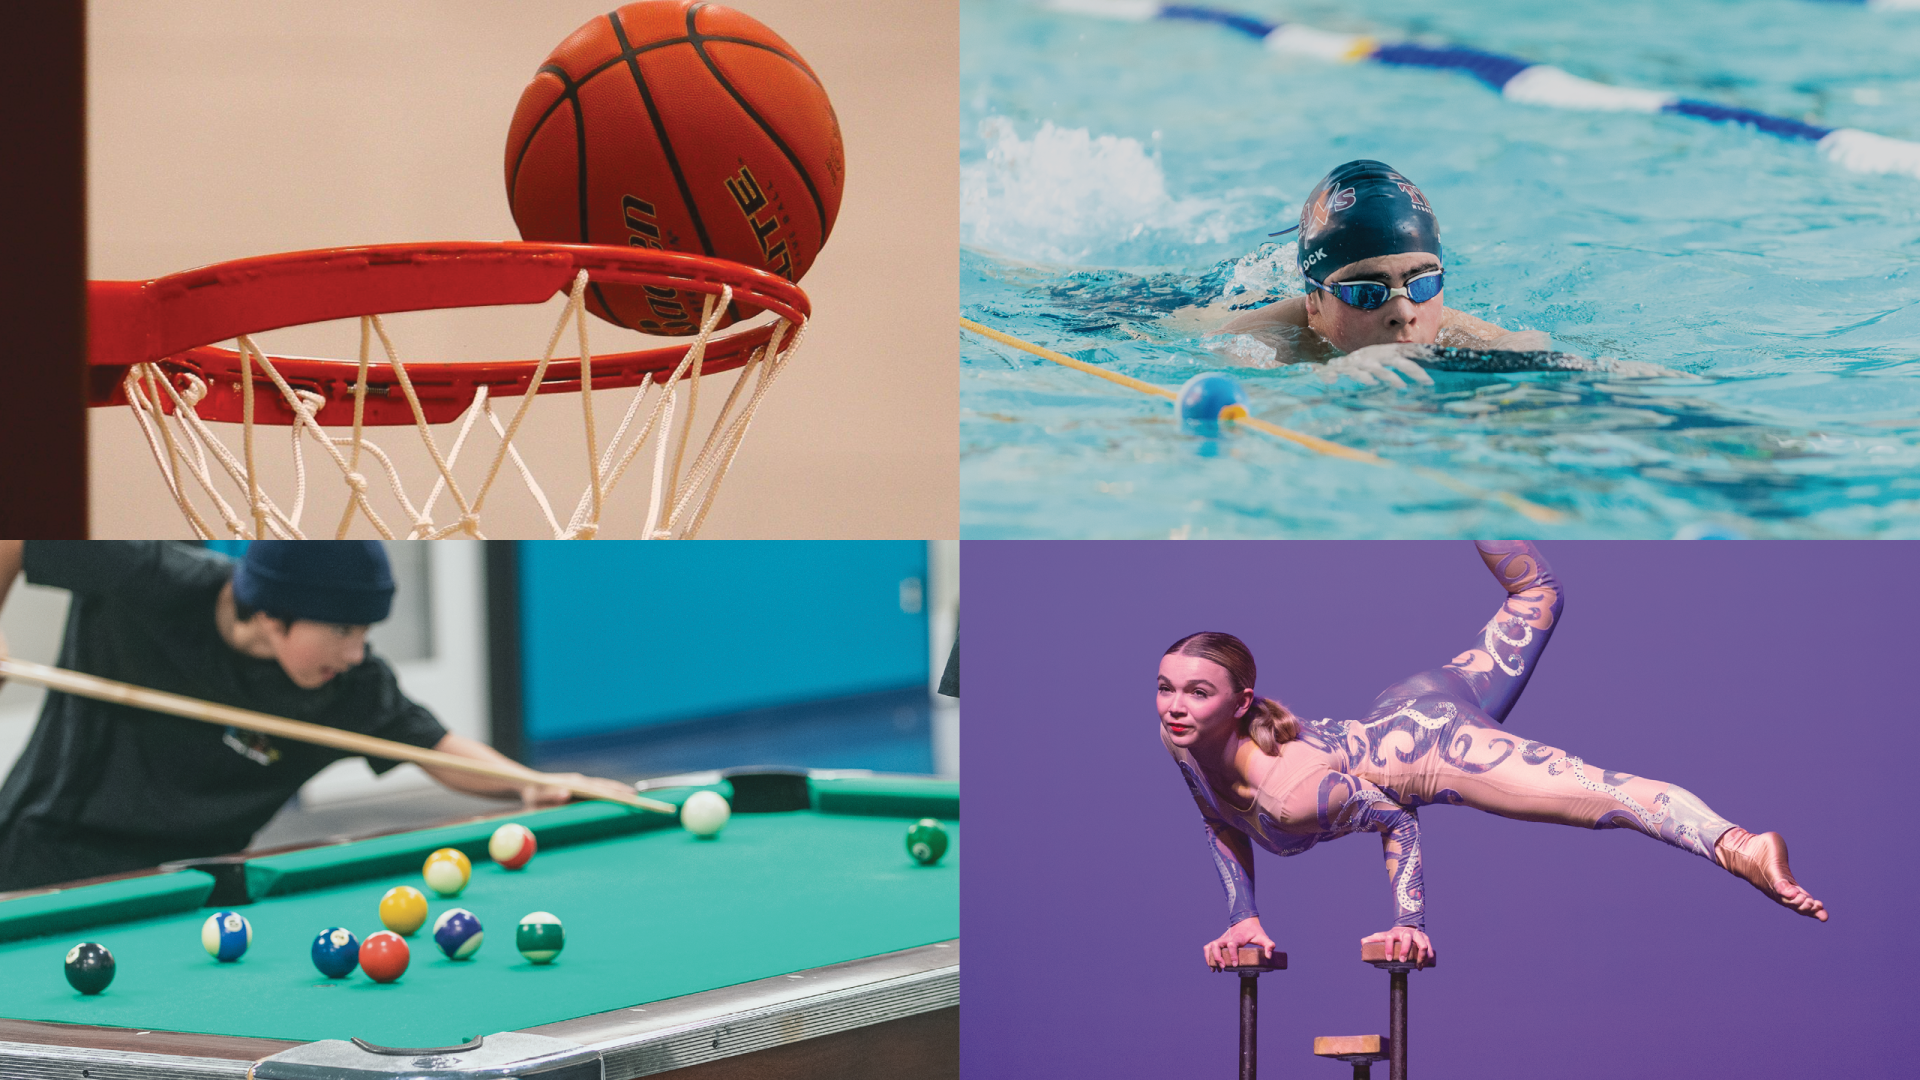 Four pictures are set in a rectangular grid. The top-left corner is a basketball about to enter a hoop. Top-right is a male swimmer in a pool. Bottom-left is a young man playing pool. Bottom-right is a young woman performing an acrobatic pose.